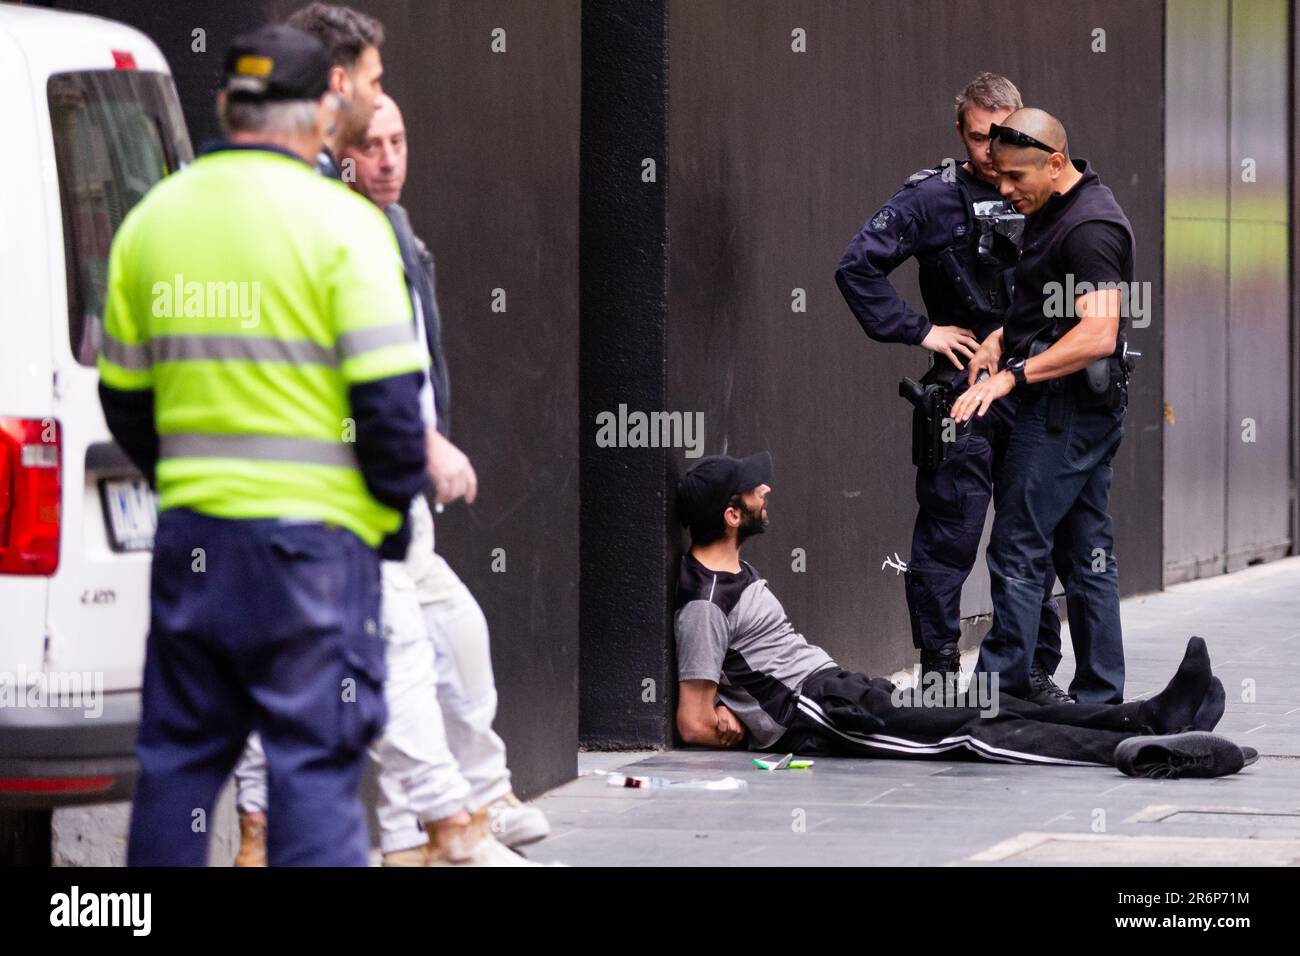 MELBOURNE, AUSTRALIA - MAY 28: A man is arrested for allegedly dealing drugs in the CBD on 28 May, 2020 in Melbourne, Australia. With international flights in and out of Australia almost entirely halted and stricter security measures due to COVID-19, experts are predicting a major decrease in the amount of illicit drugs entering Australia illegally. The side effect being that this may force many to turn to alternative drugs more available locally. Stock Photo